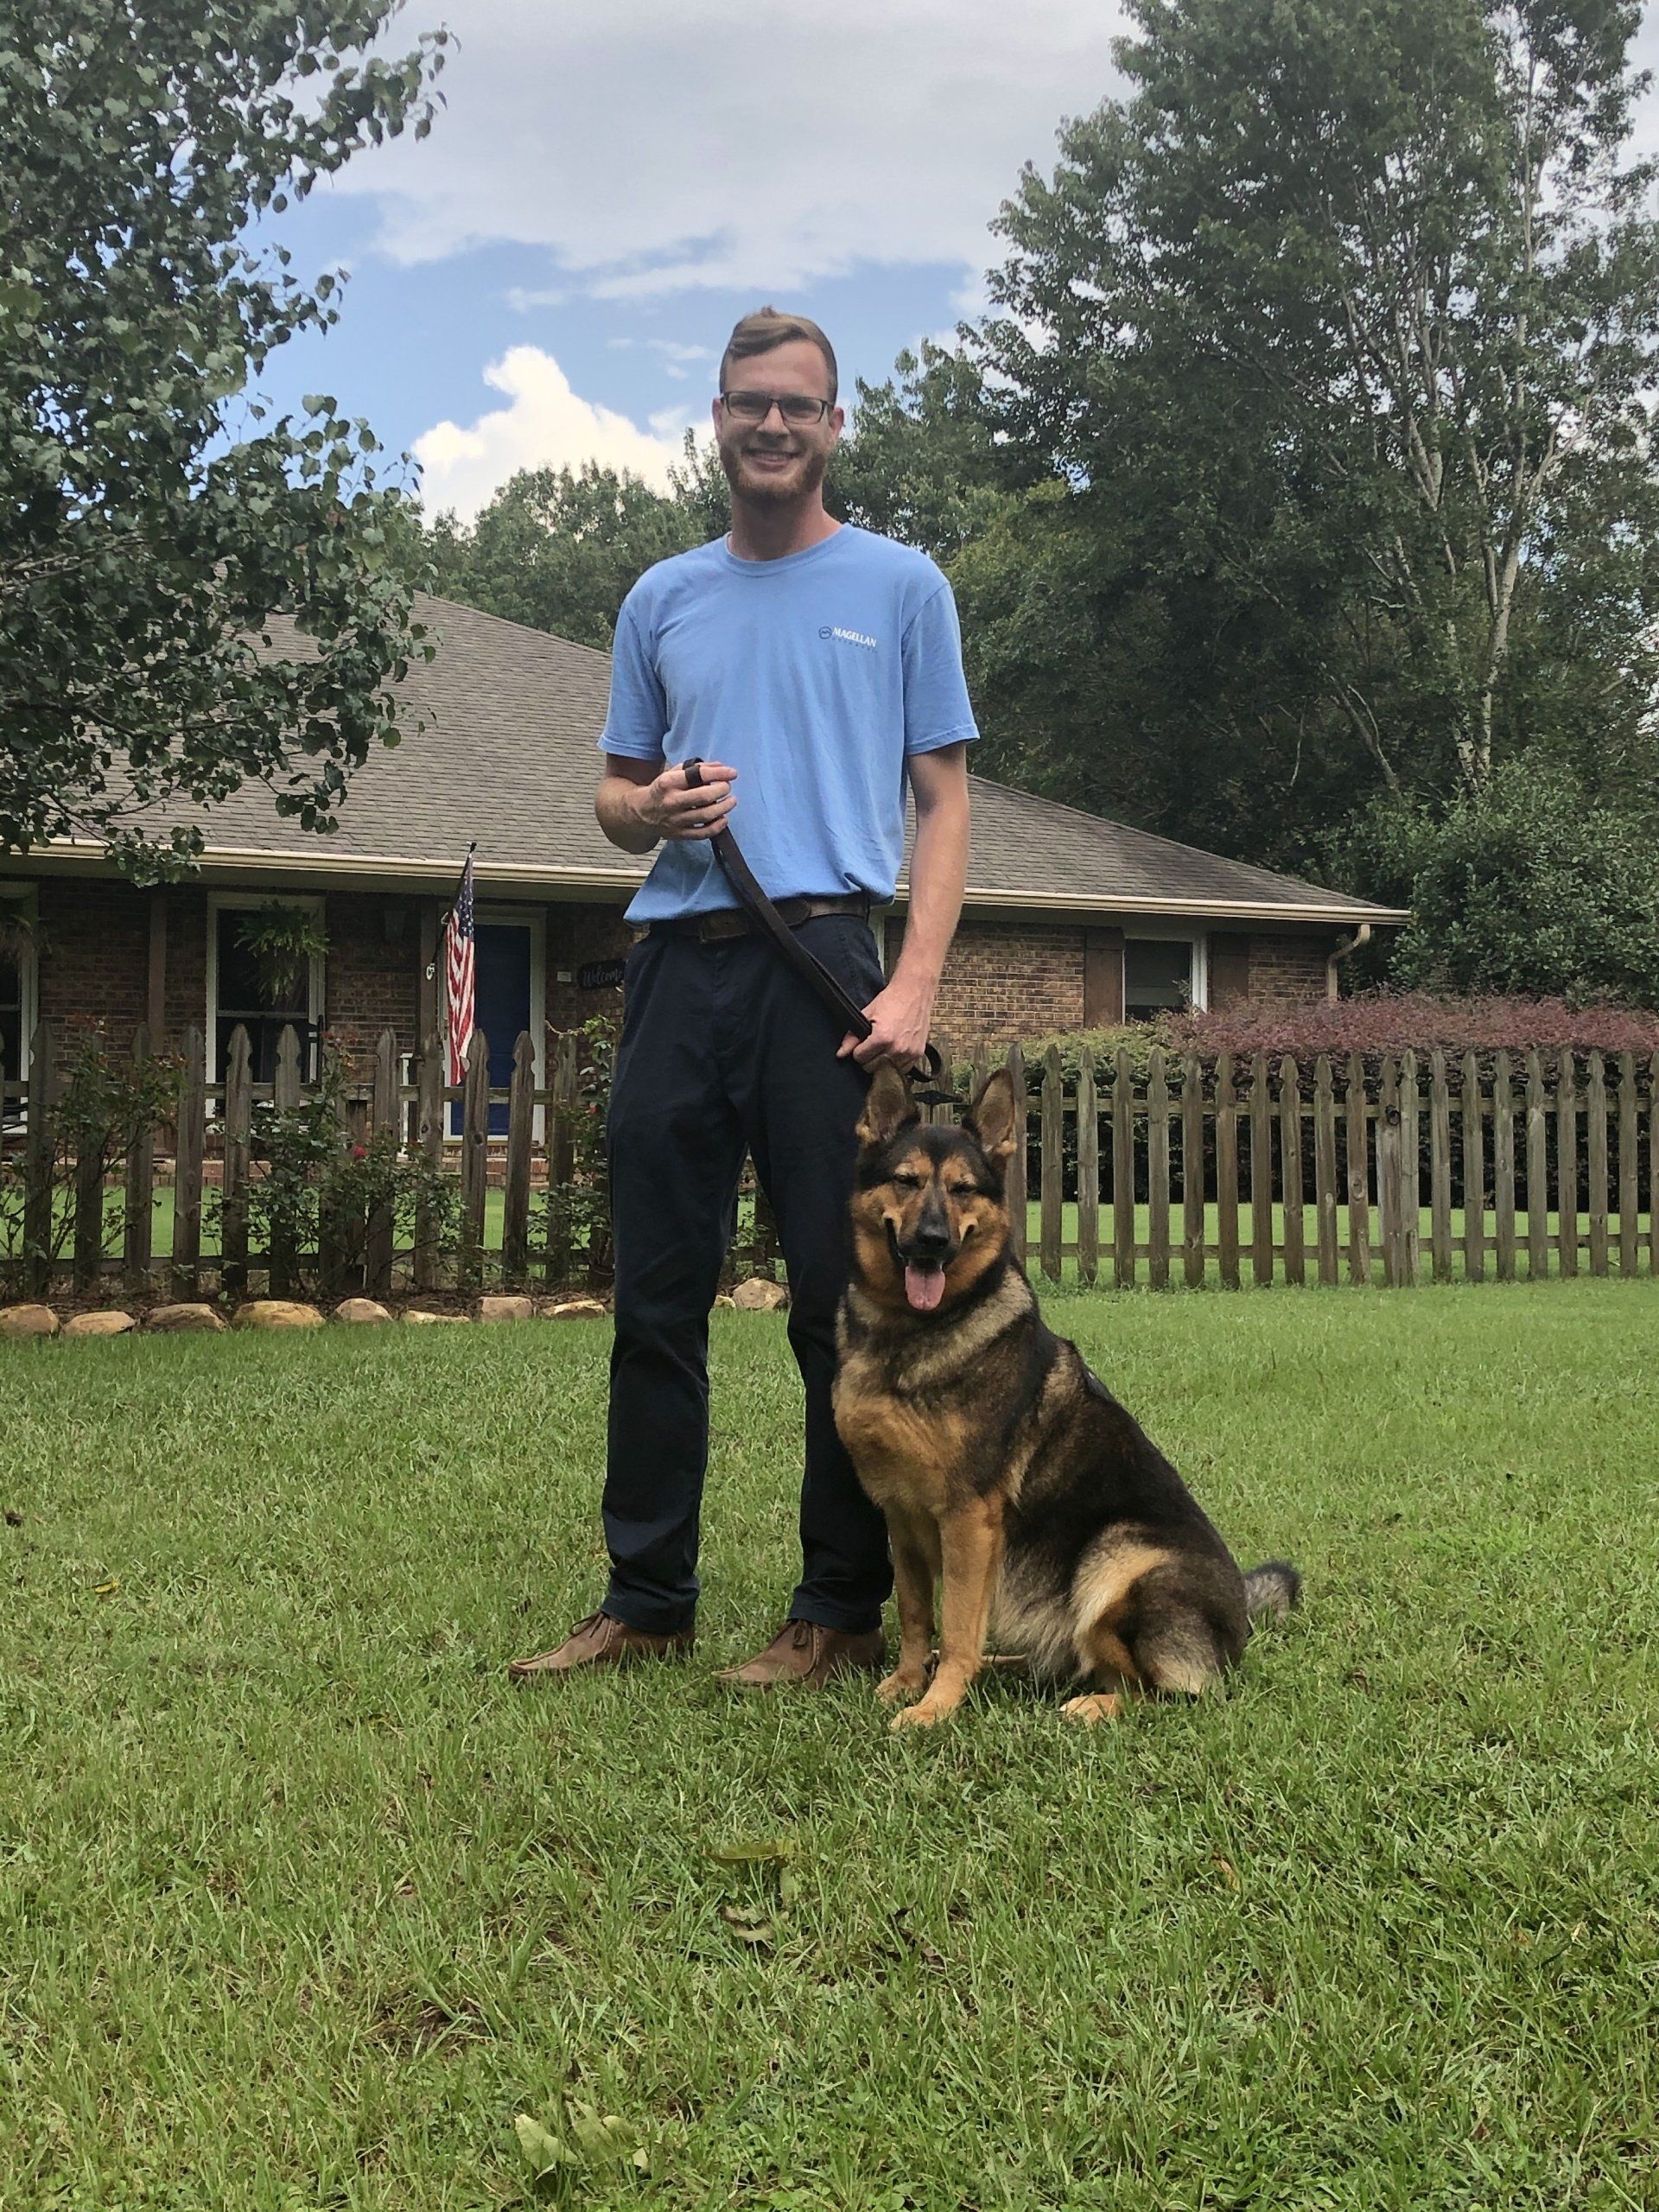 A man is standing next to a german shepherd in a yard.